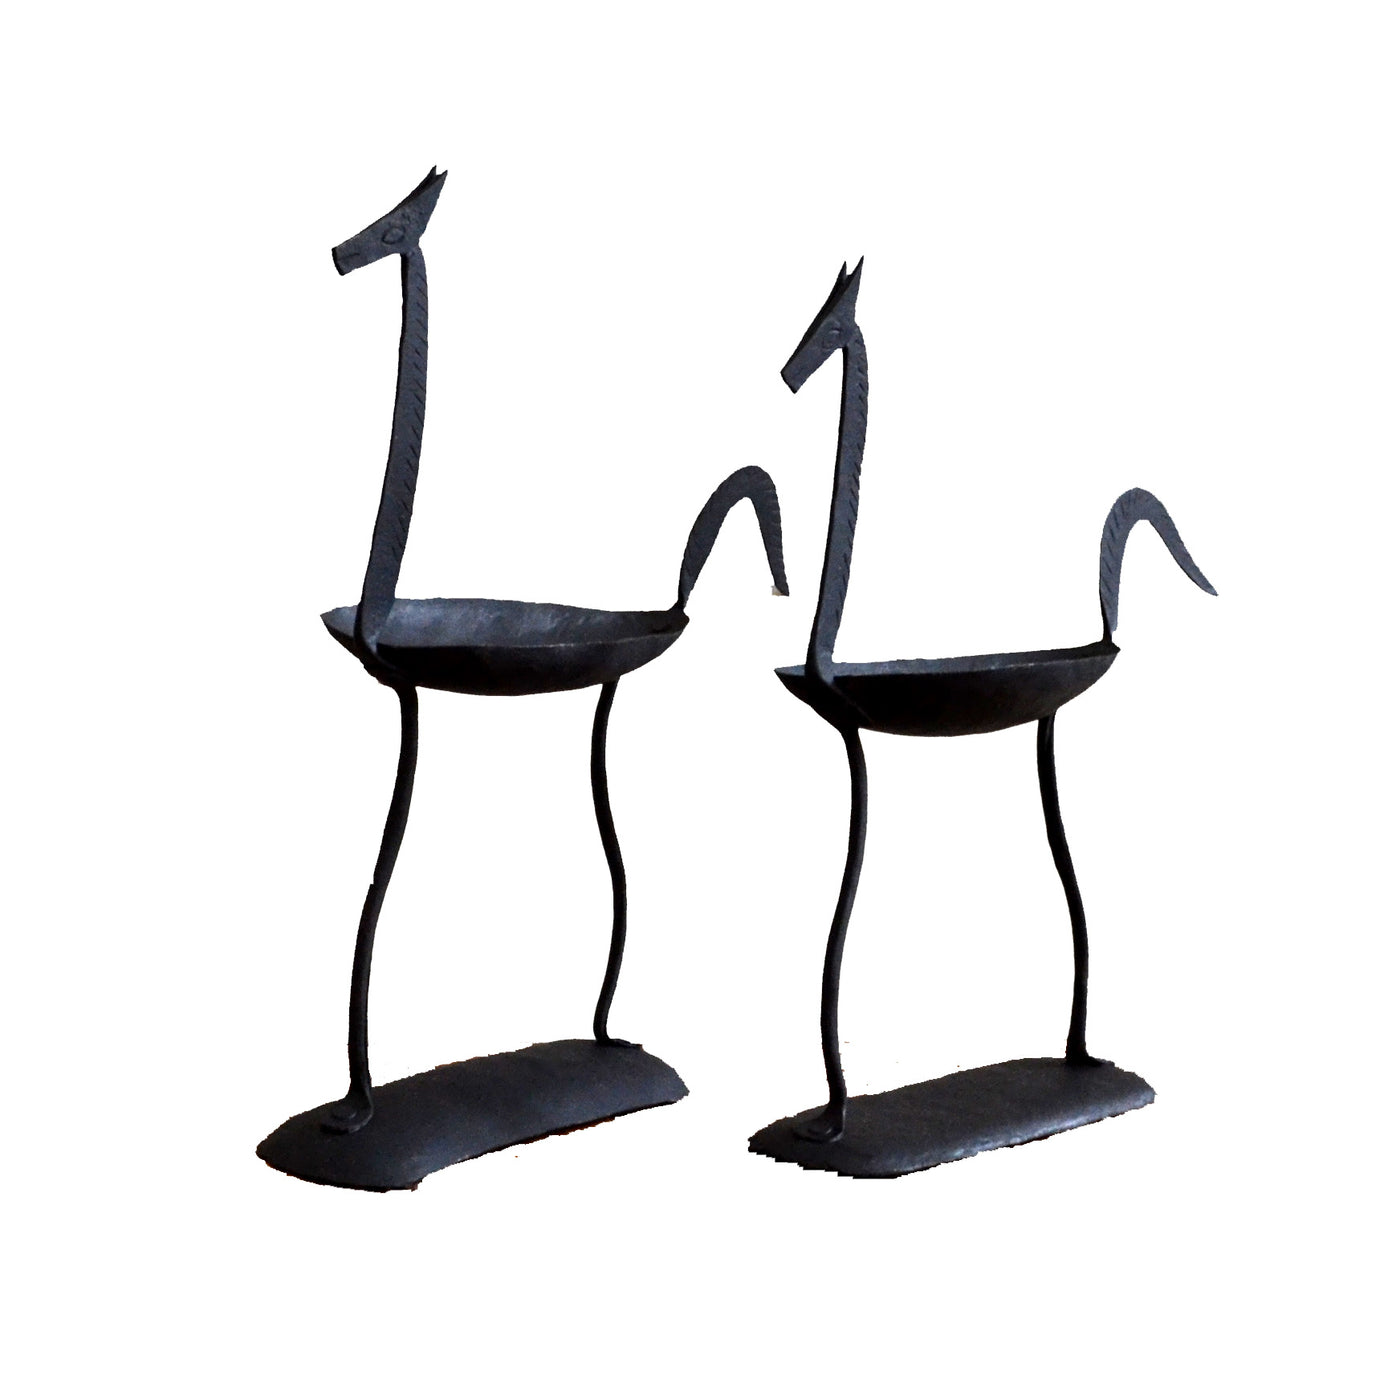 Wrought Iron Tribal Horse Pair Candle Stand - Decor & Living - 3